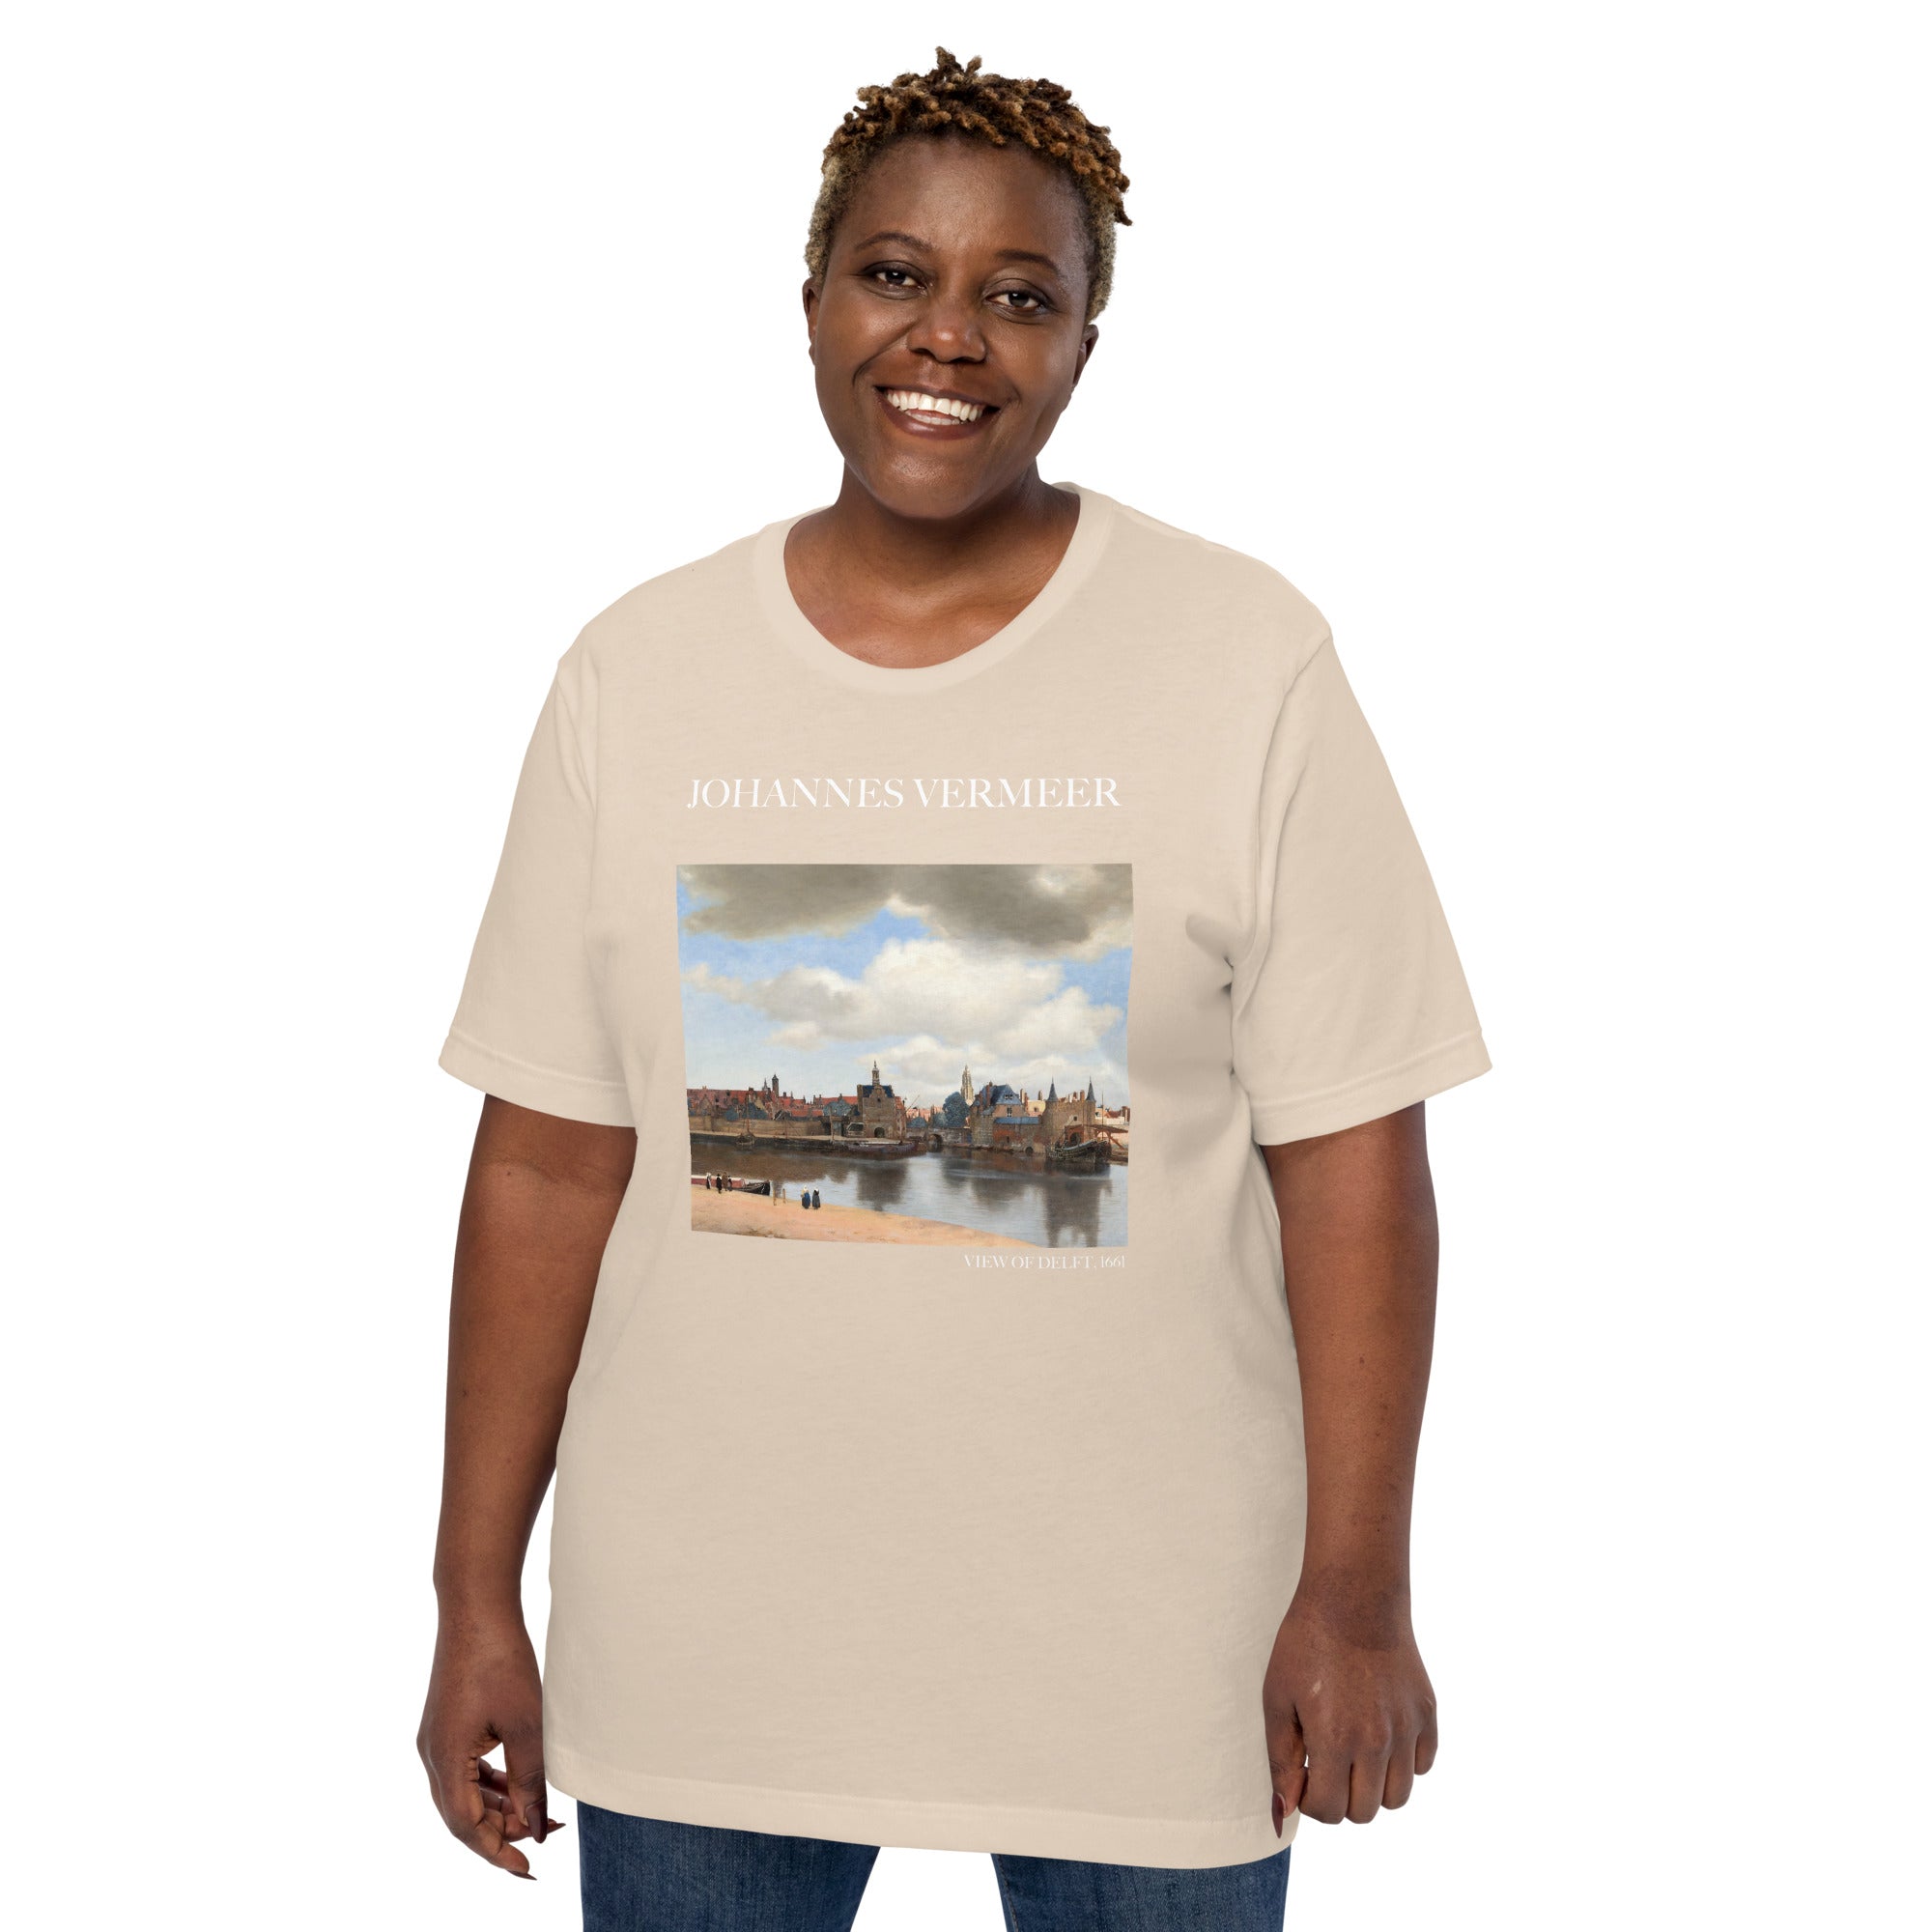 Johannes Vermeer 'View of Delft' Famous Painting T-Shirt | Unisex Classic Art Tee